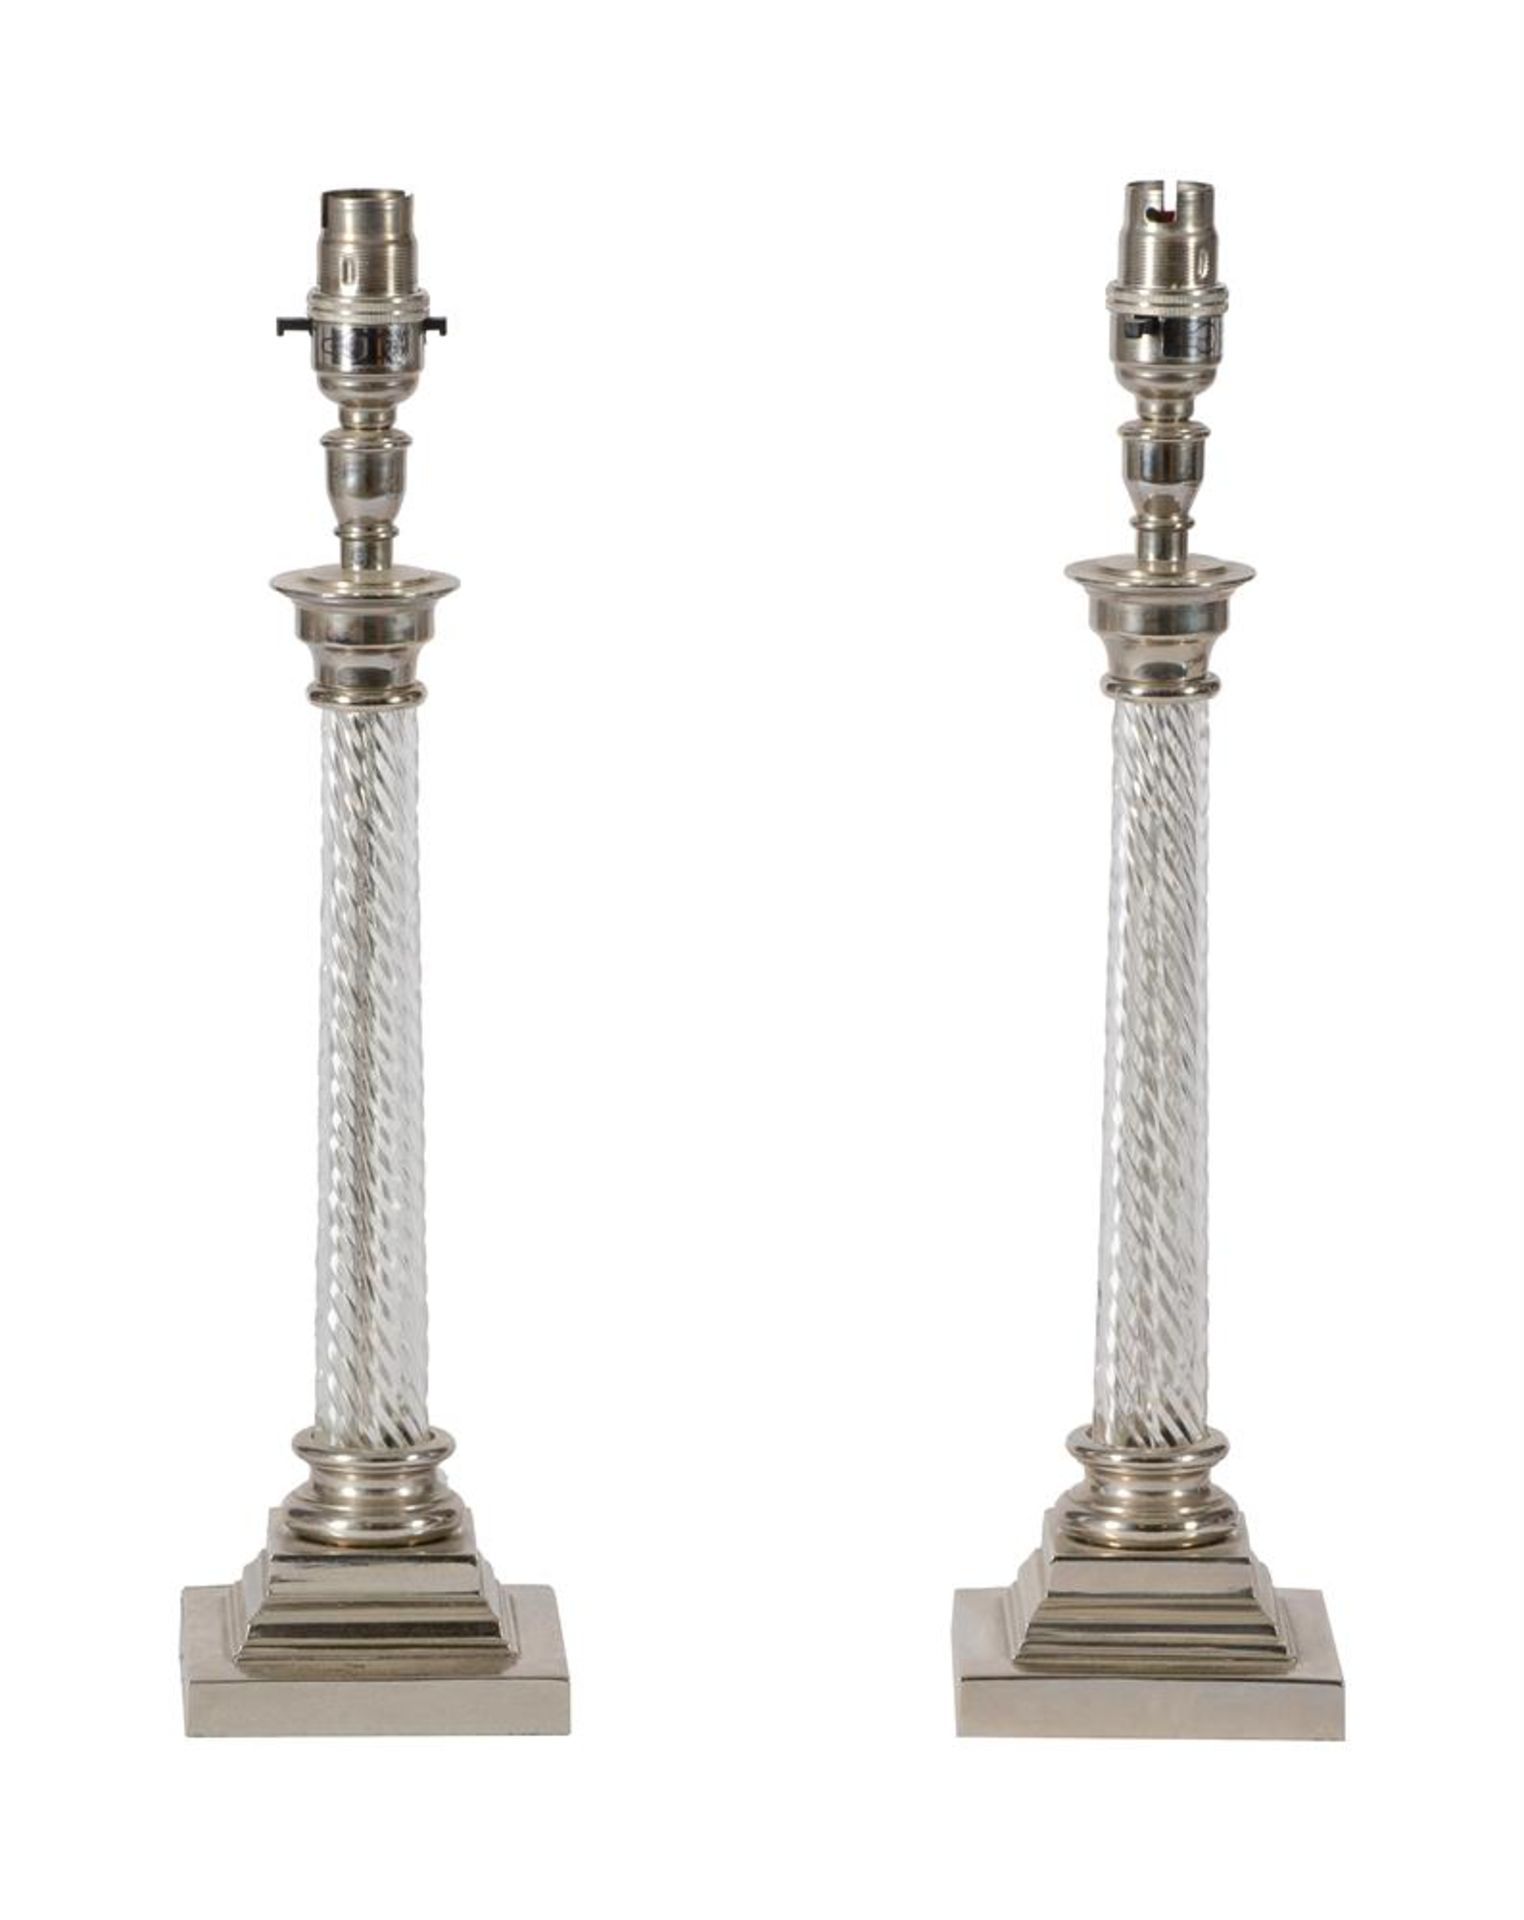 A PAIR OF GLASS AND CHROME TABLE LAMPS, RECENLY MANUFACTURED BY BELLA FIGURA